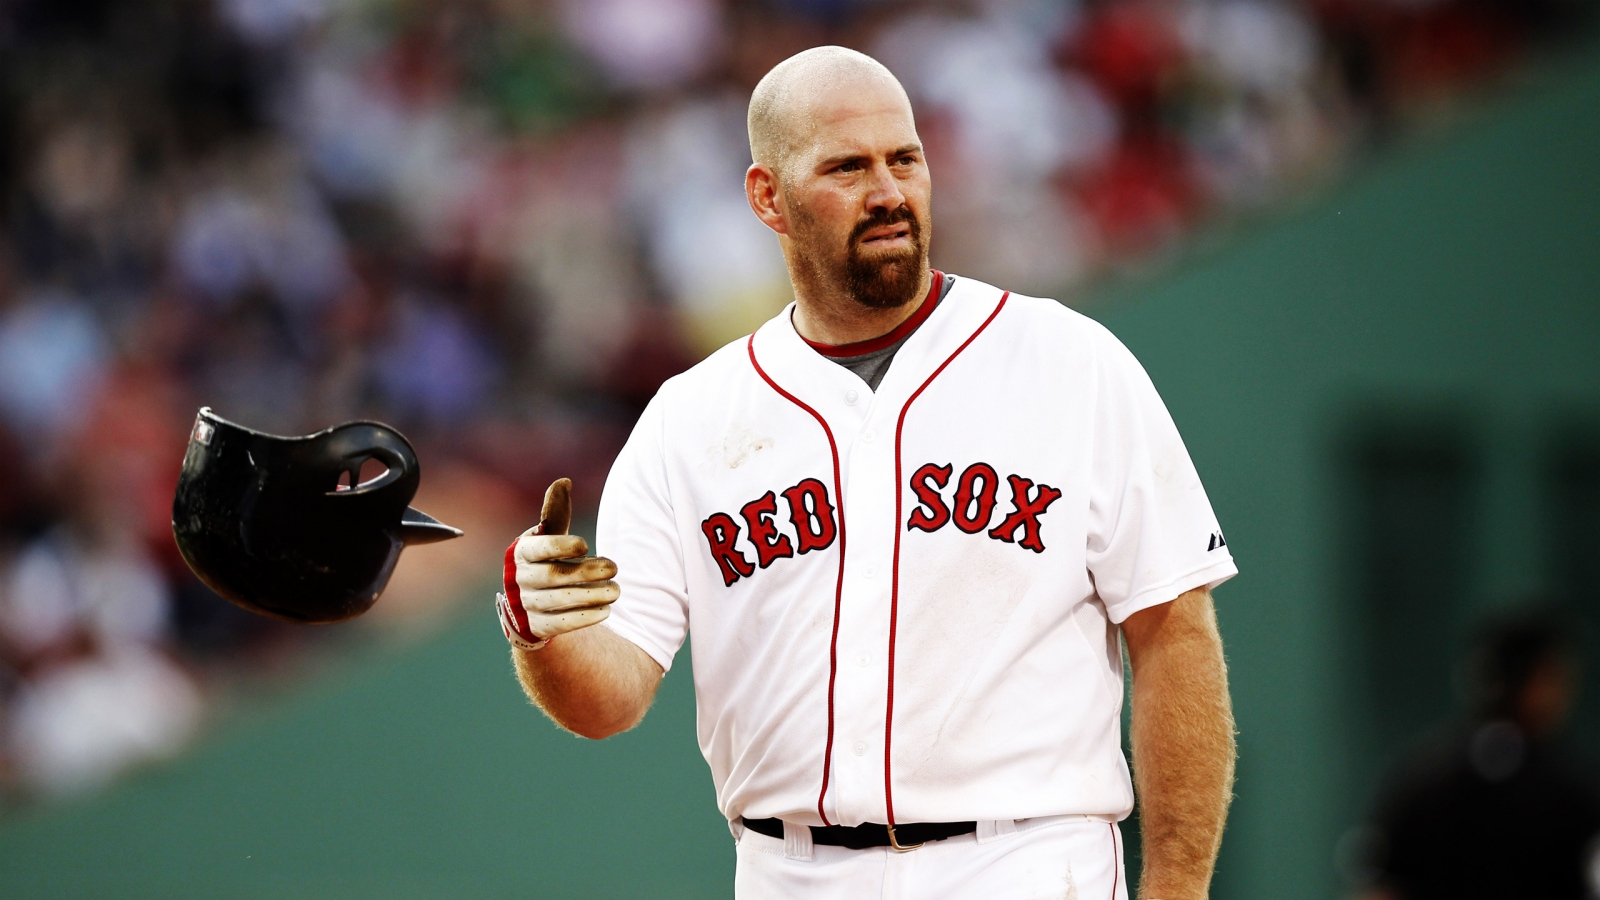 Kevin Youkilis for 1600 x 900 HDTV resolution